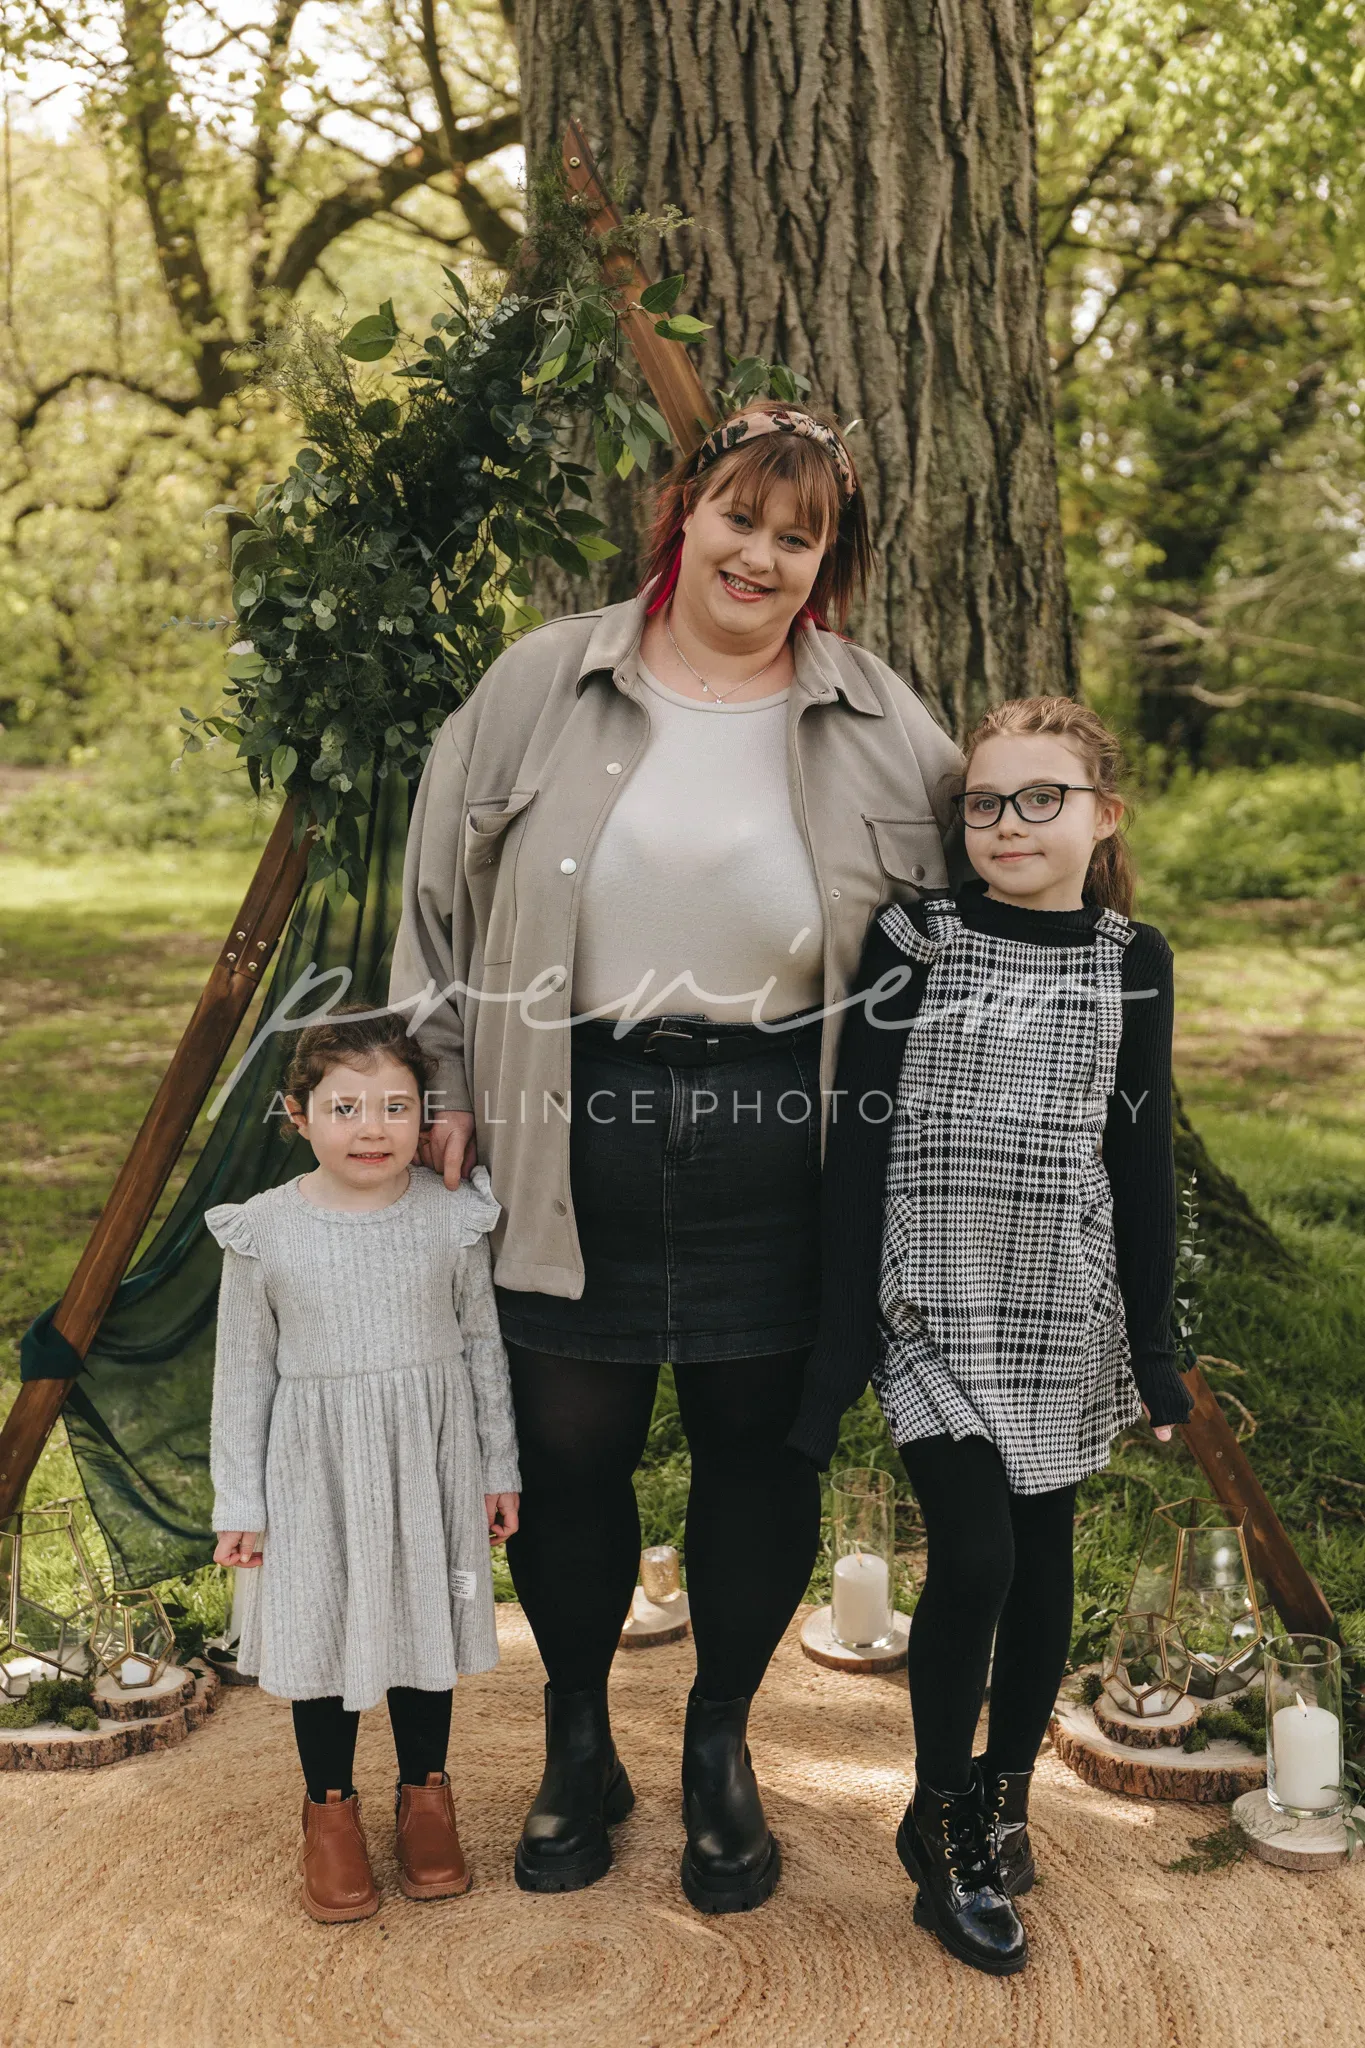 Gabrielle stands between two young girls in front of a large tree, smiling at the camera. A wooden tripod with greenery is on the left, and lanterns are on the ground. The